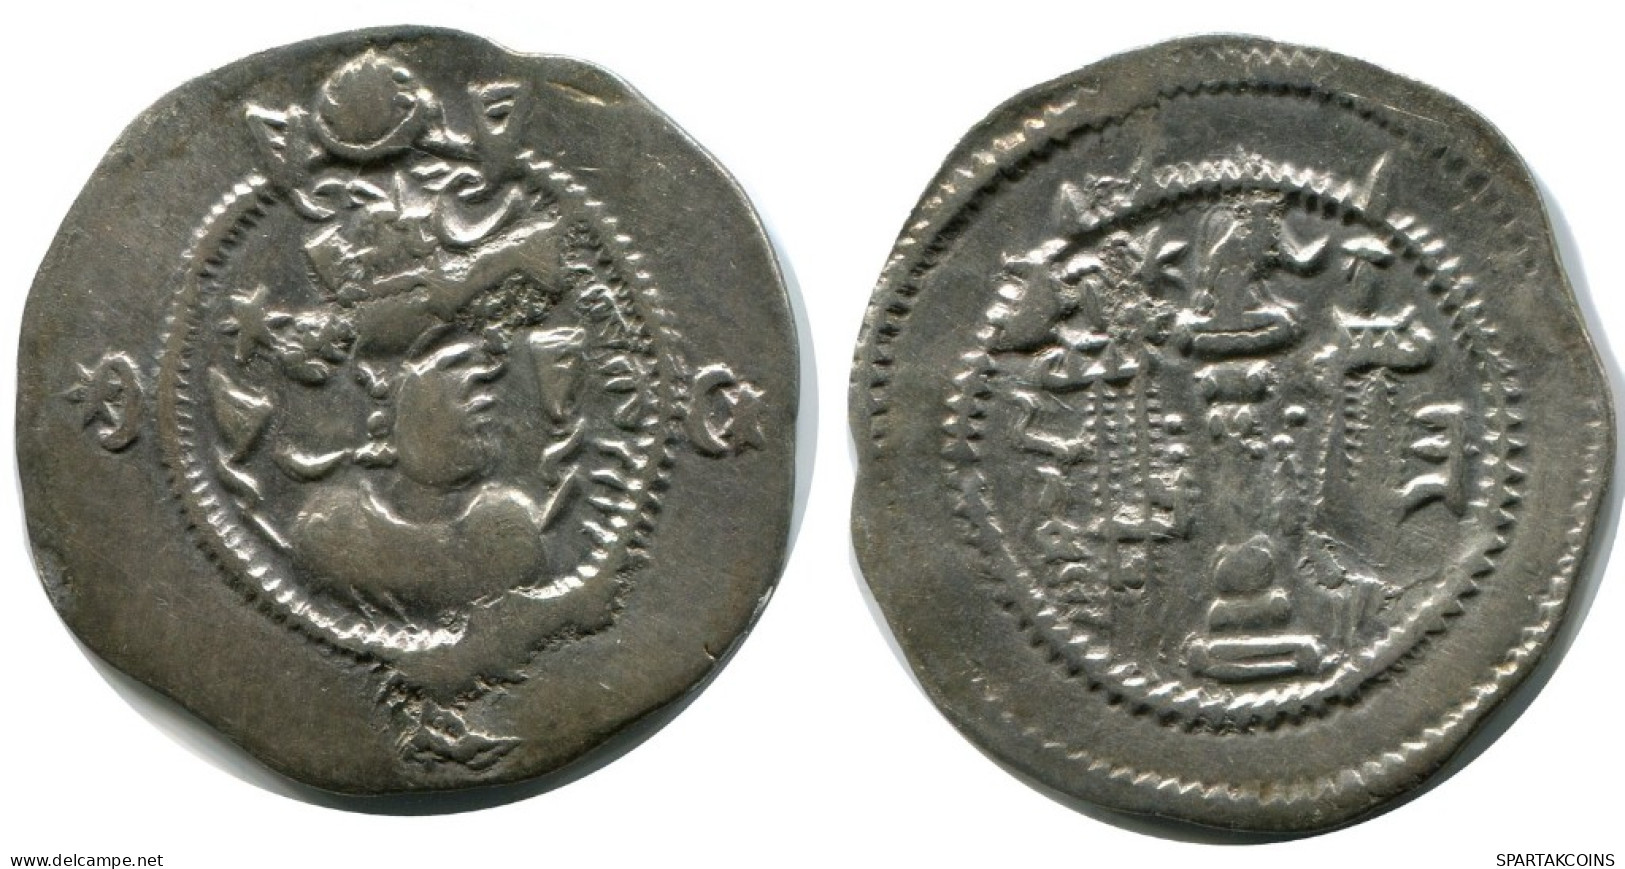 SASSANIAN KAVADH I 2ND REIGN AD499-531 AR Drachm WH MINT YEAR 36 #AH236.73.F.A - Oosterse Kunst